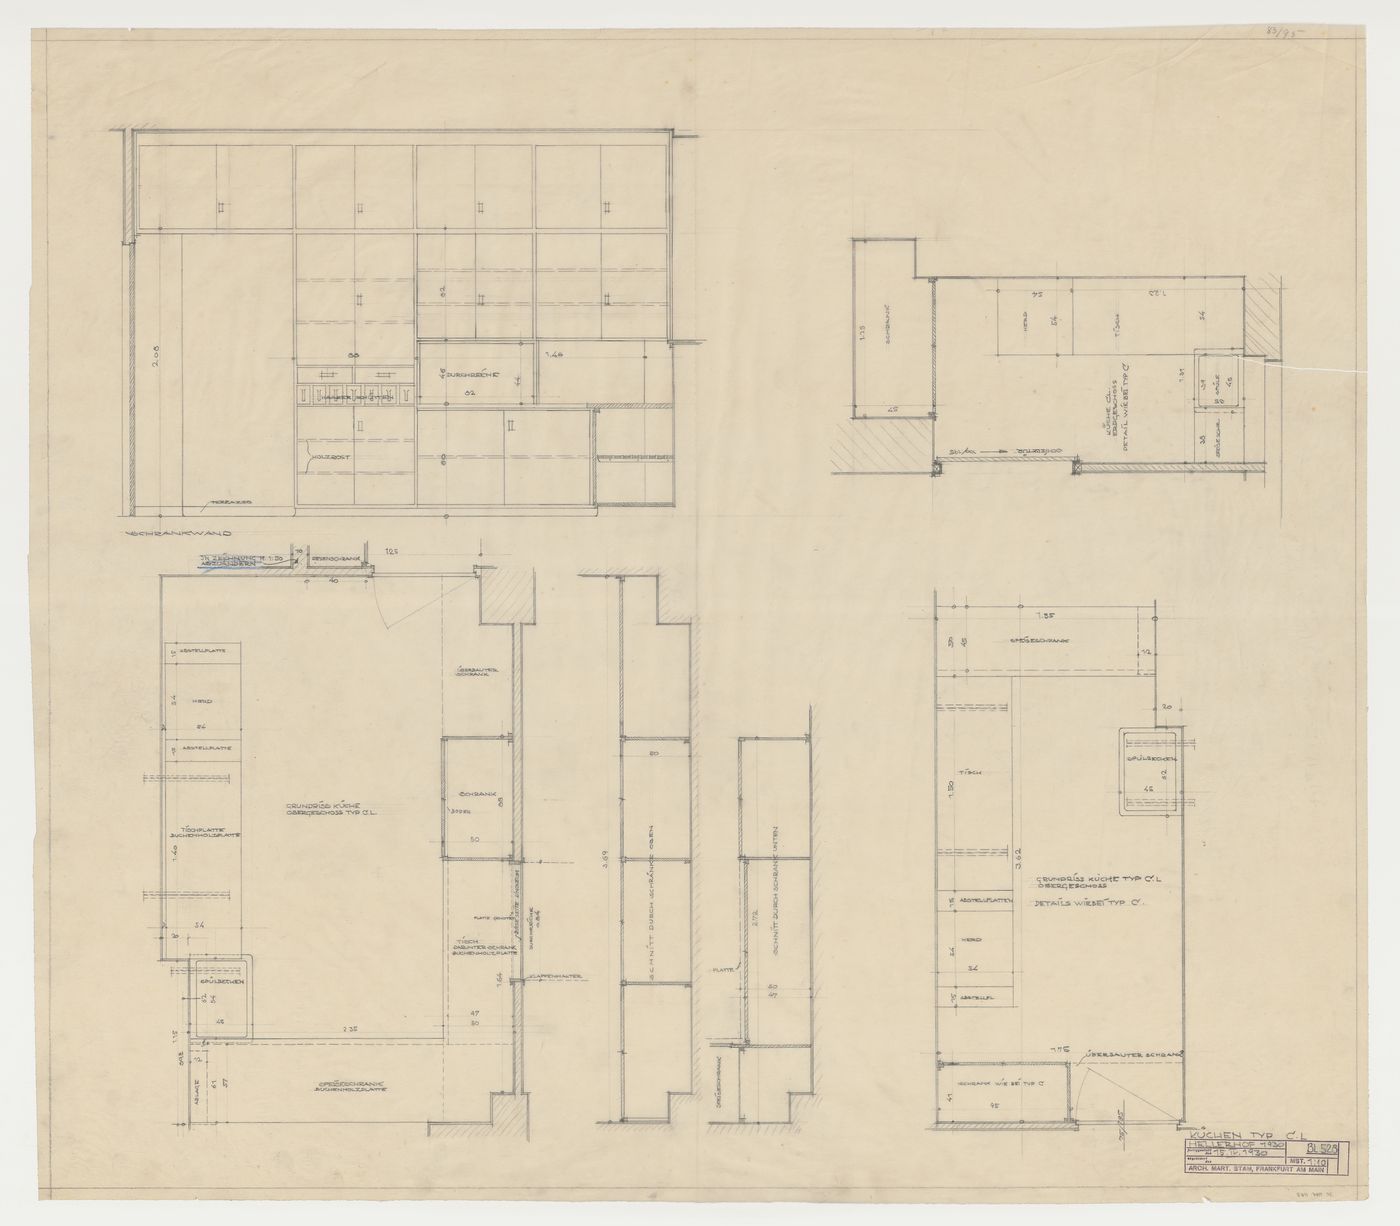 Ground and first floor plans and elevation for kitchens for a type CL housing unit, Hellerhof Housing Estate, Frankfurt am Main, Germany